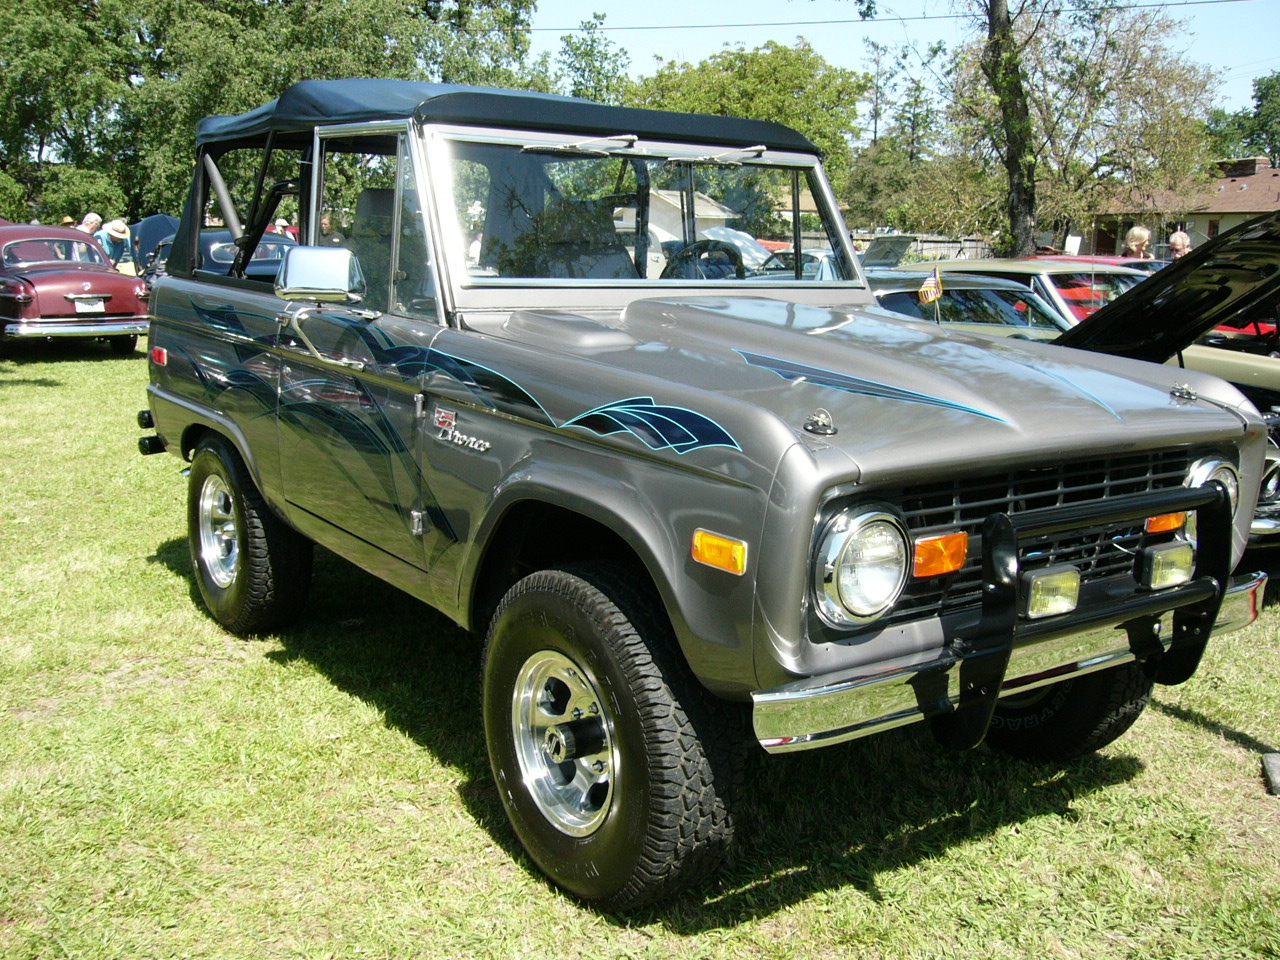 Early Ford Bronco by ~haafasst